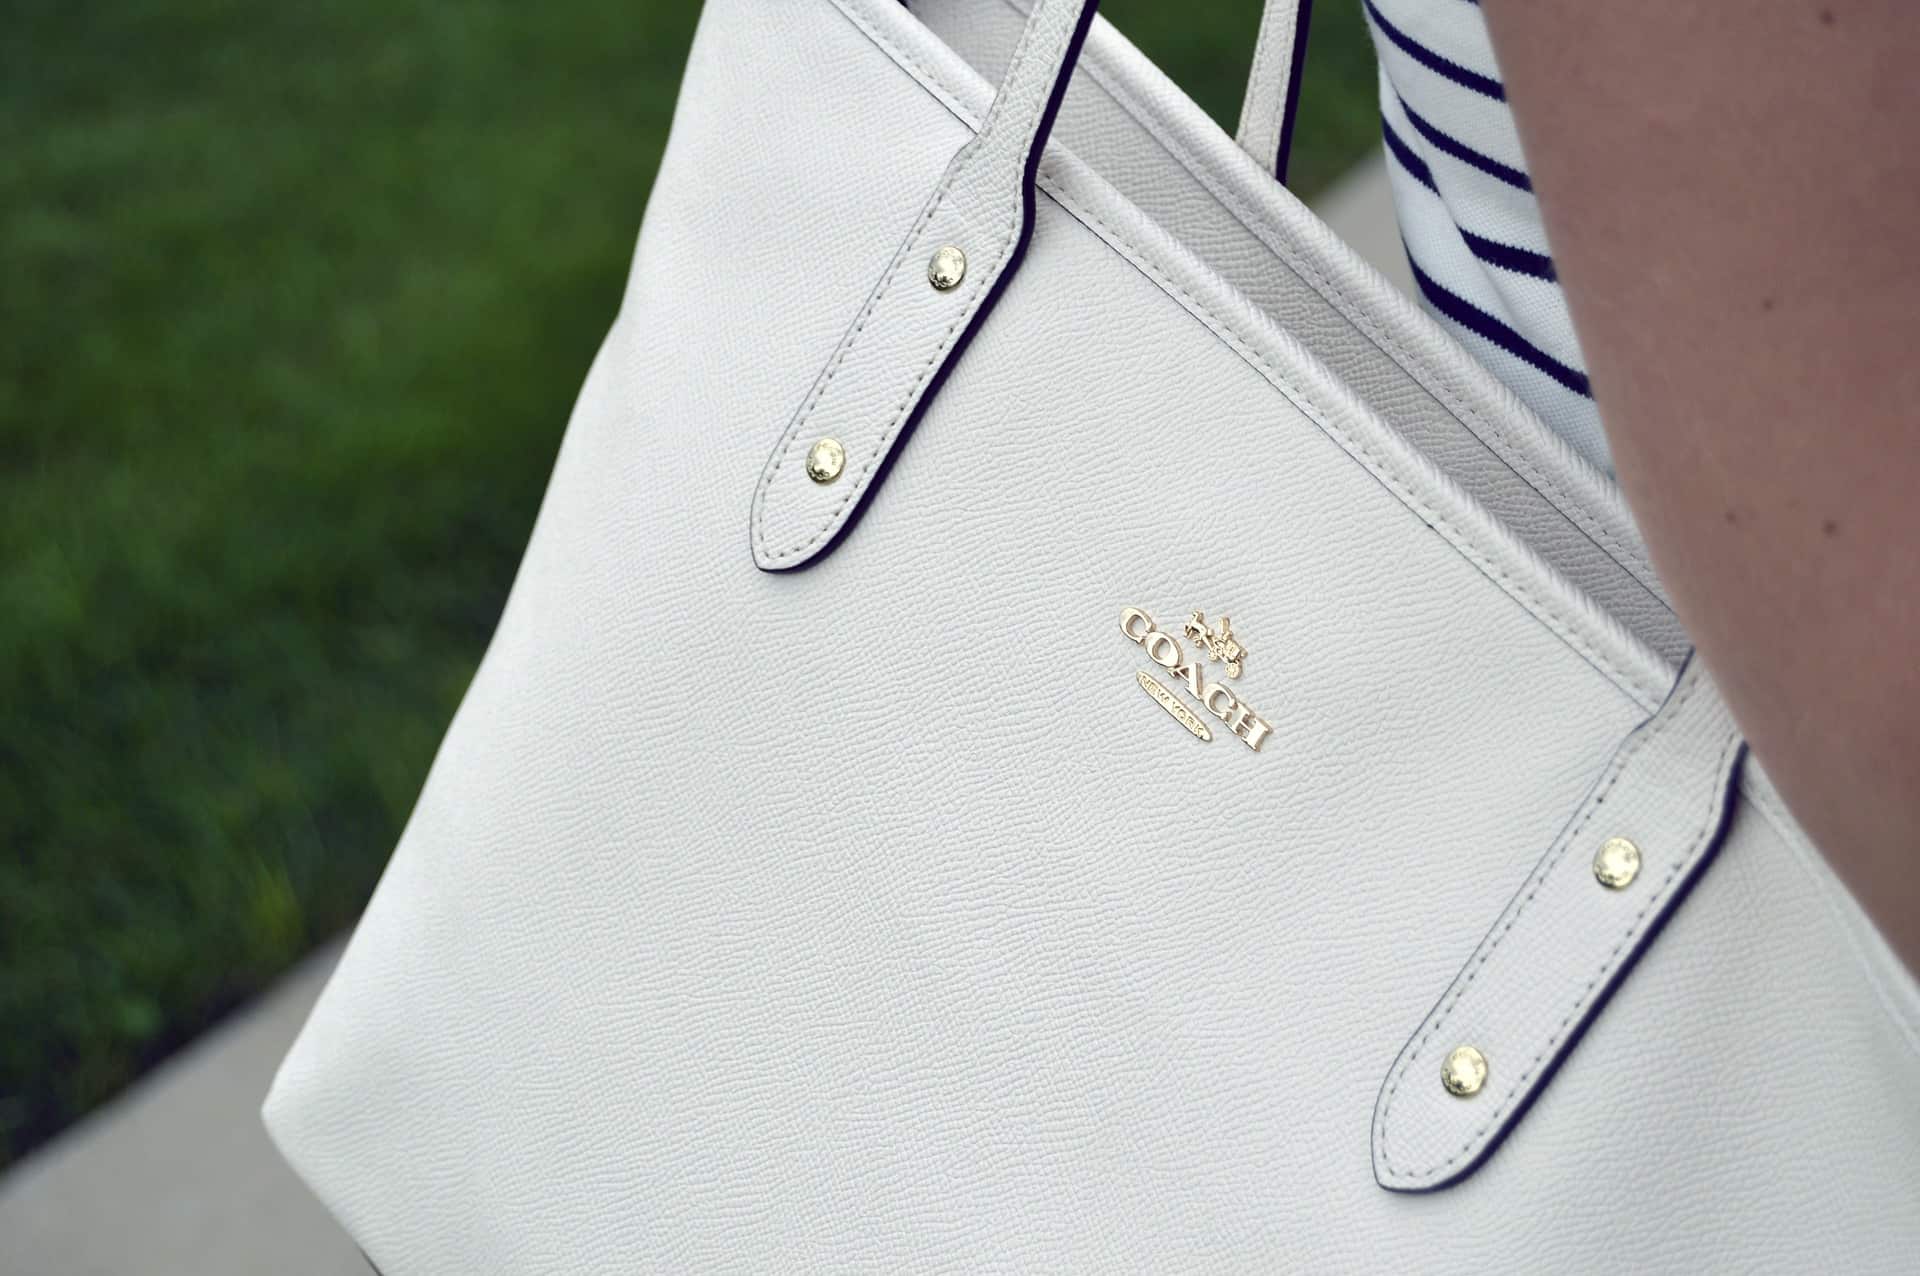 The Truth About Coach Handbags: Where They're Really Made